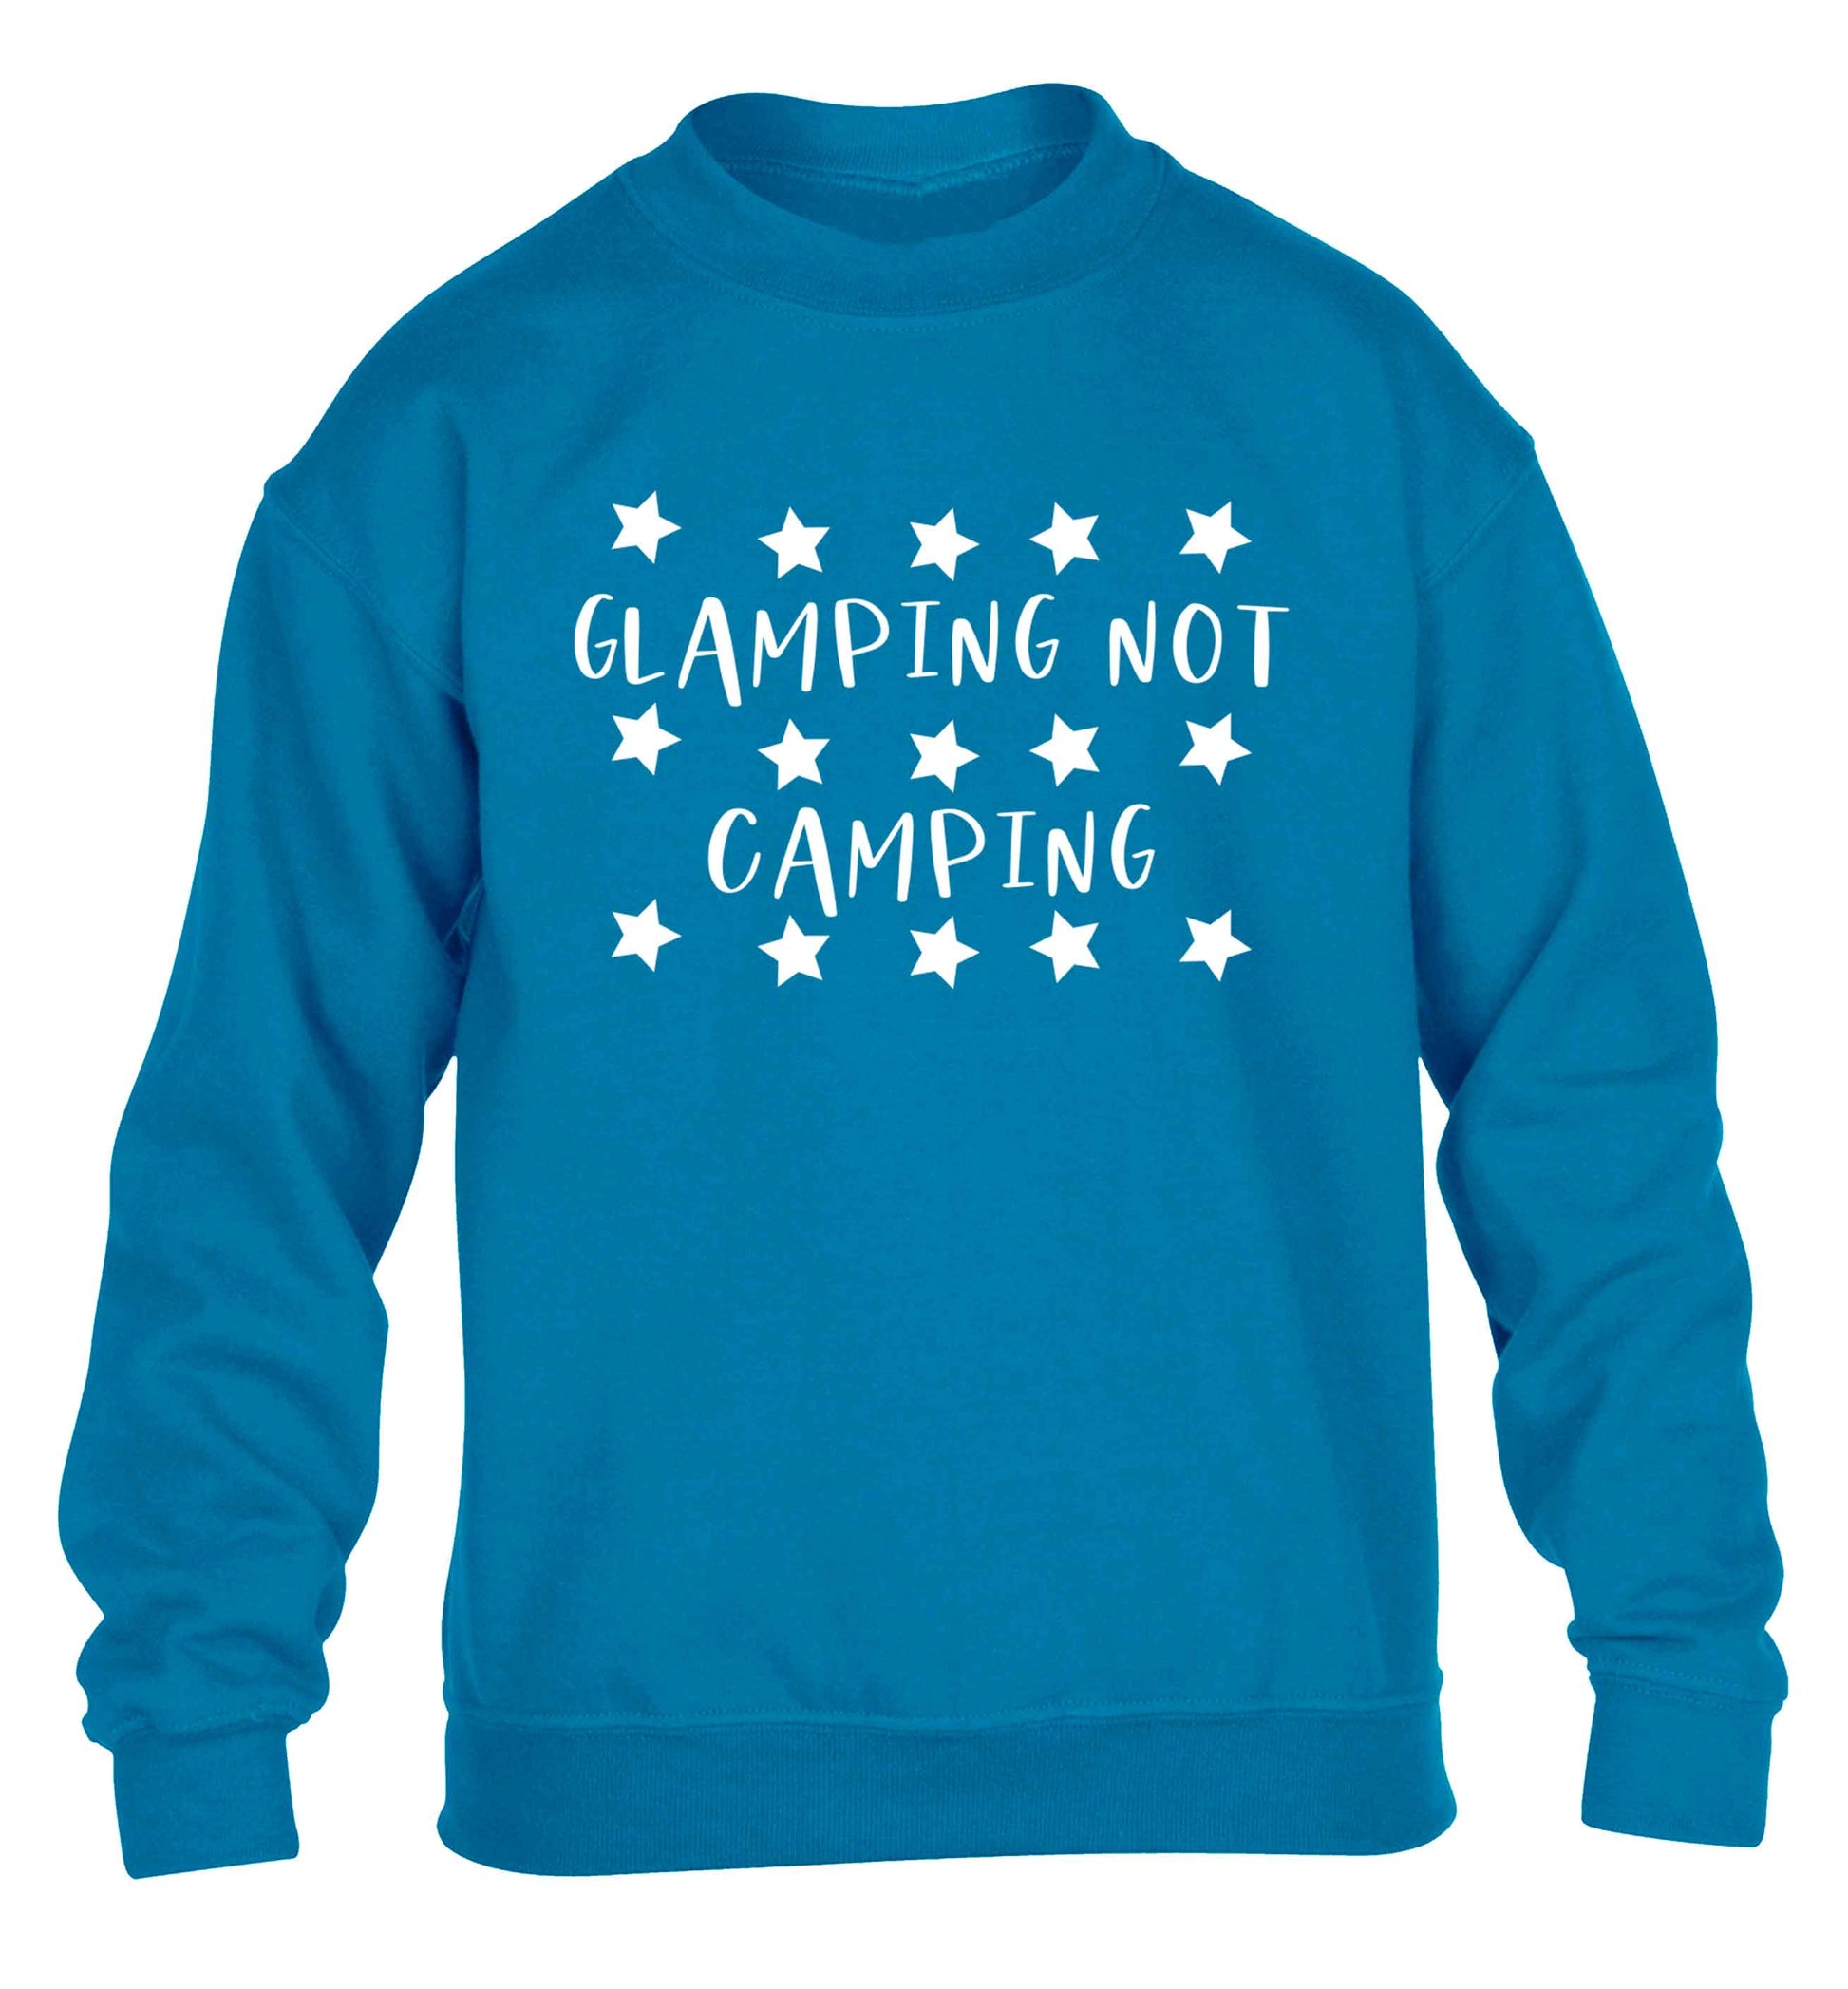 Glamping not camping children's blue sweater 12-13 Years